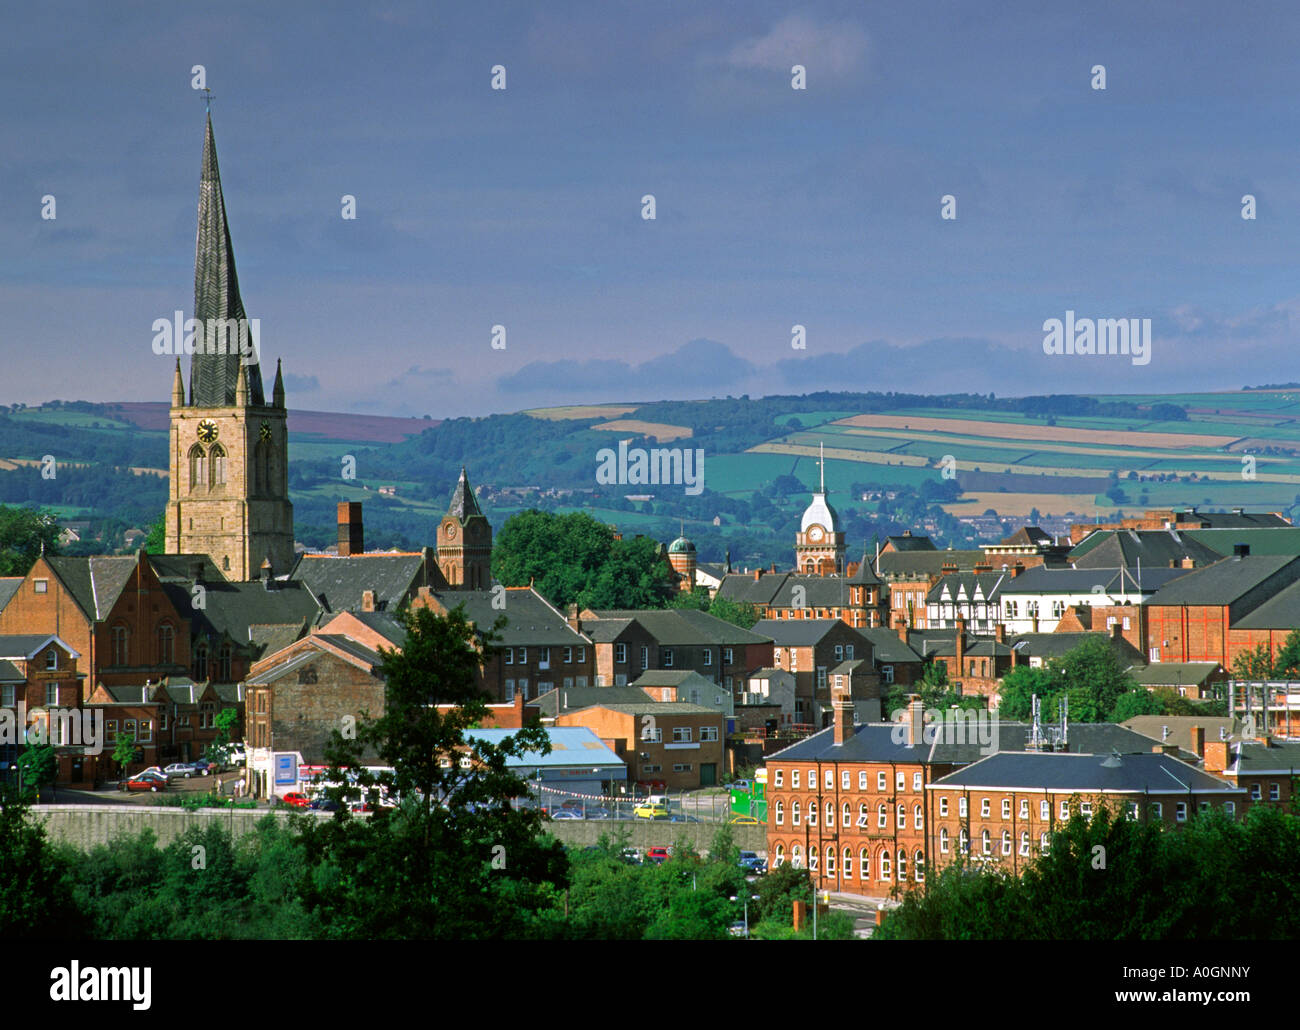 The skyline at Chesterfield in the Peak District Derbyshire England UK with the crooked spire church visible Stock Photo